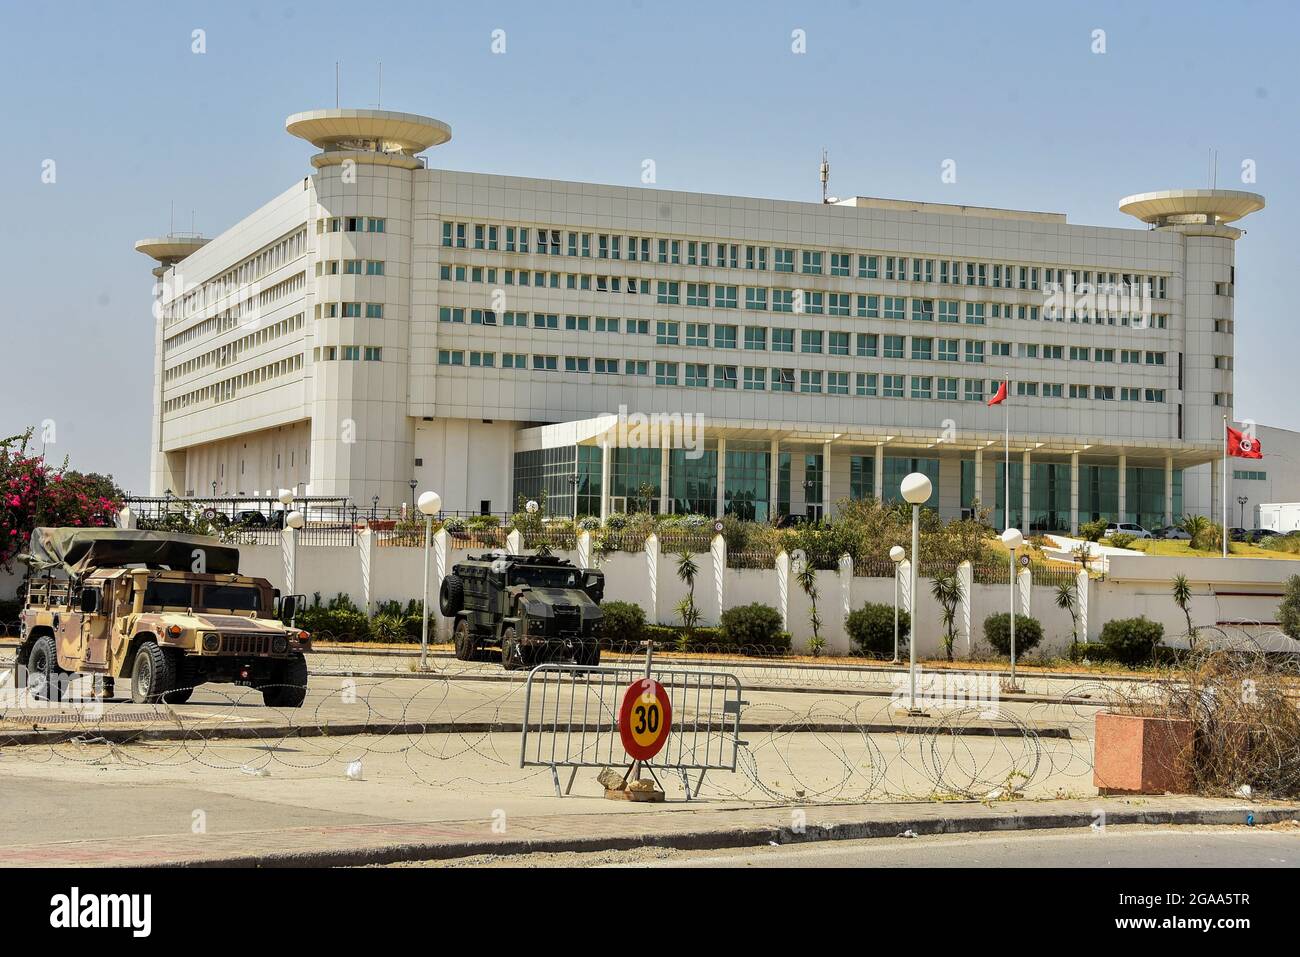 Tunis, Tunisia. 26th July, 2021. President Kais Saied has issued a  presidential decree announcing the dismissal of the CEO of the National  Television, Mohamed Lassa‚d Dahech.The Tunisian army is stationed in front